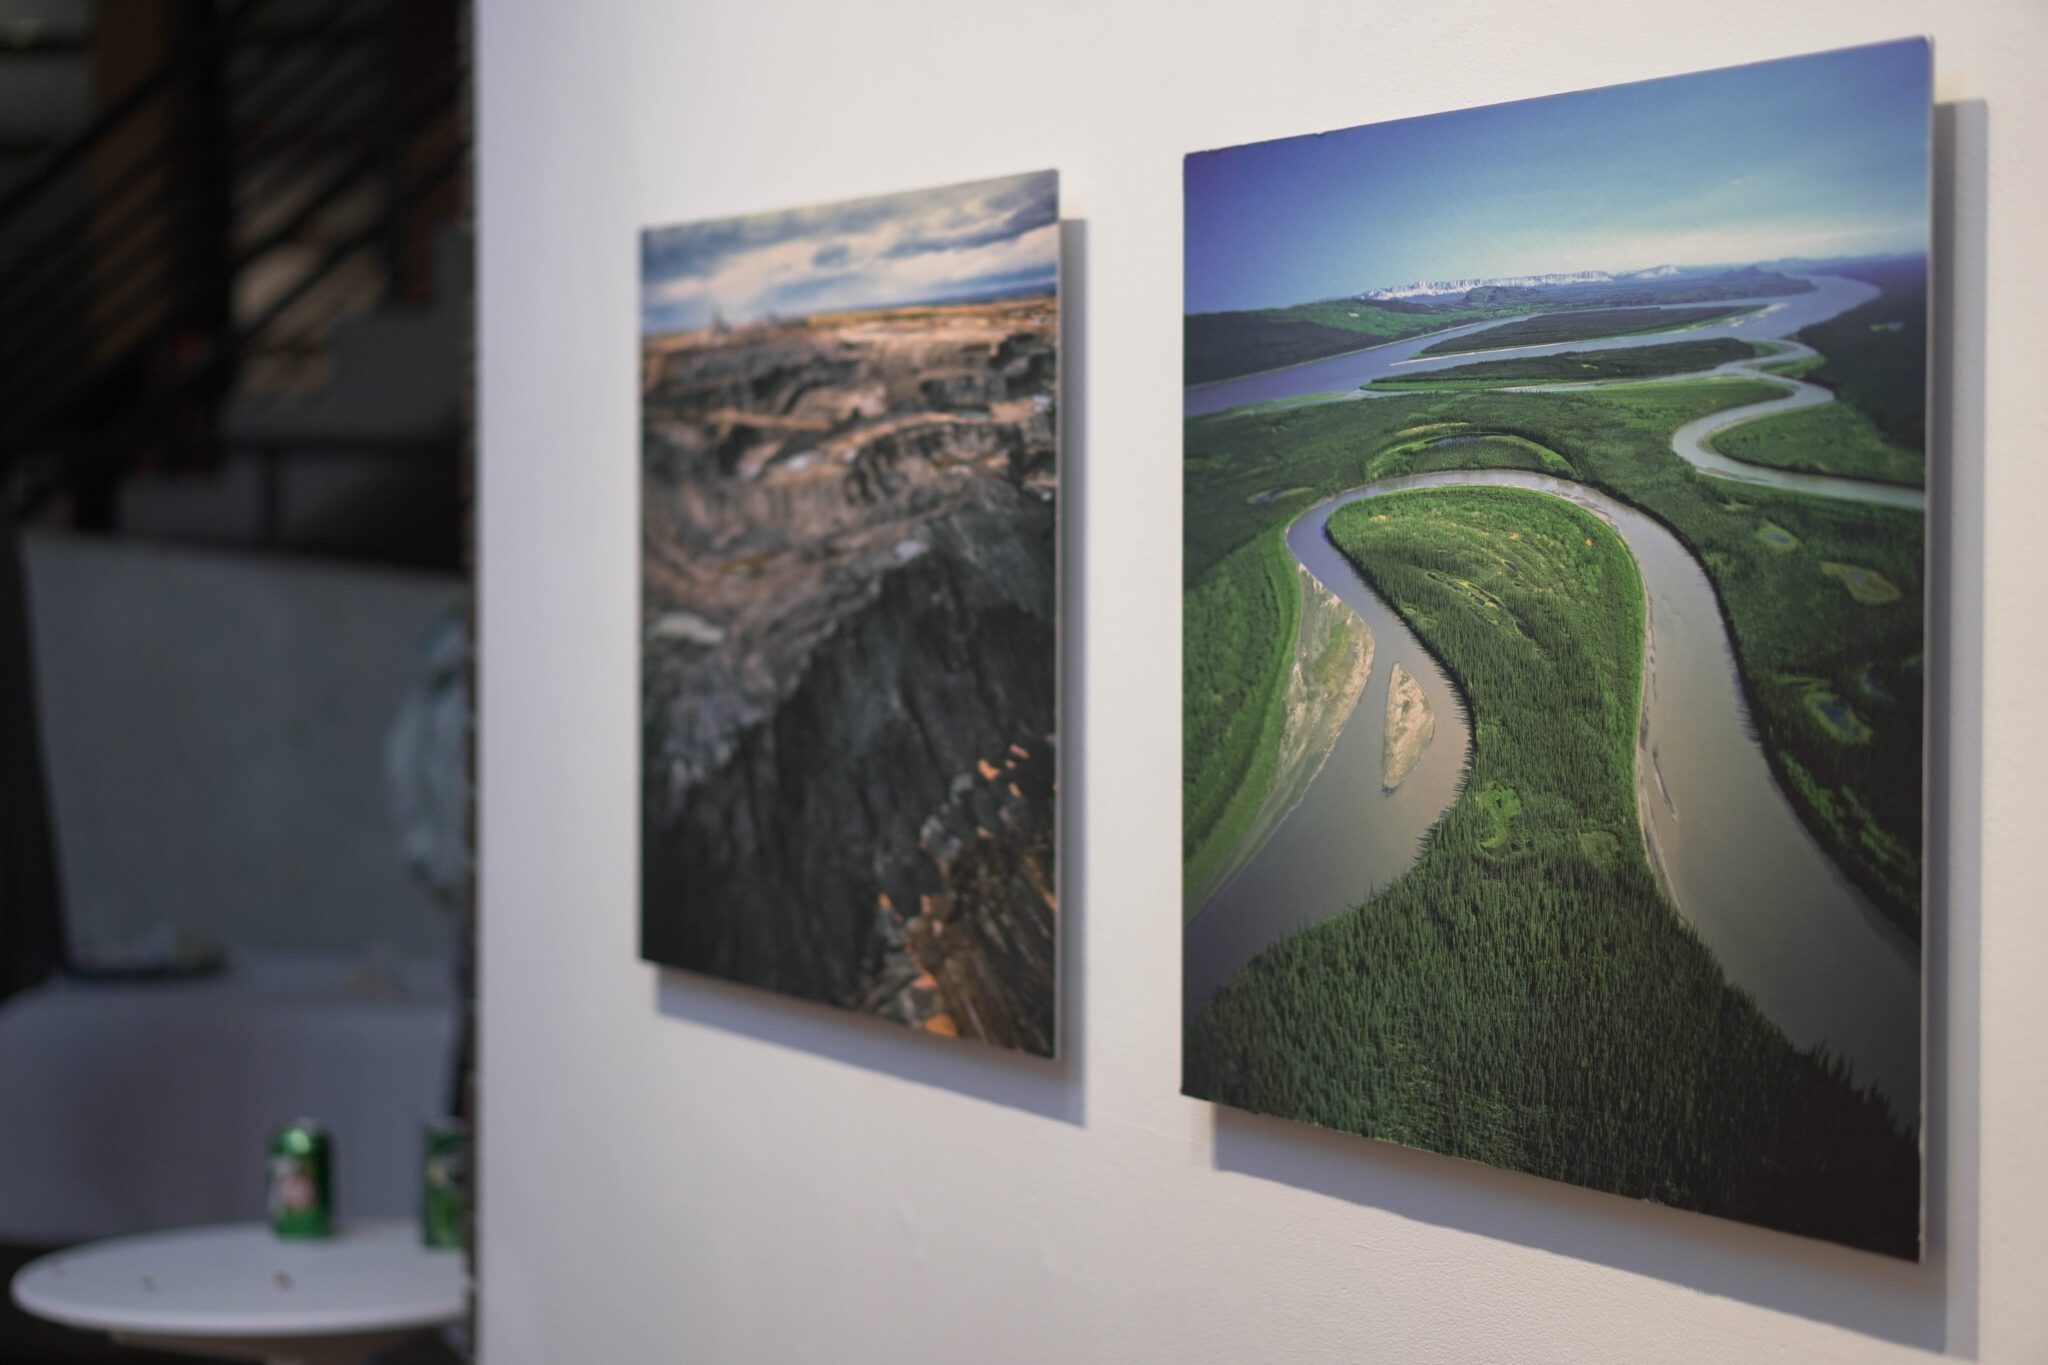 Two photographs at an art exhibit